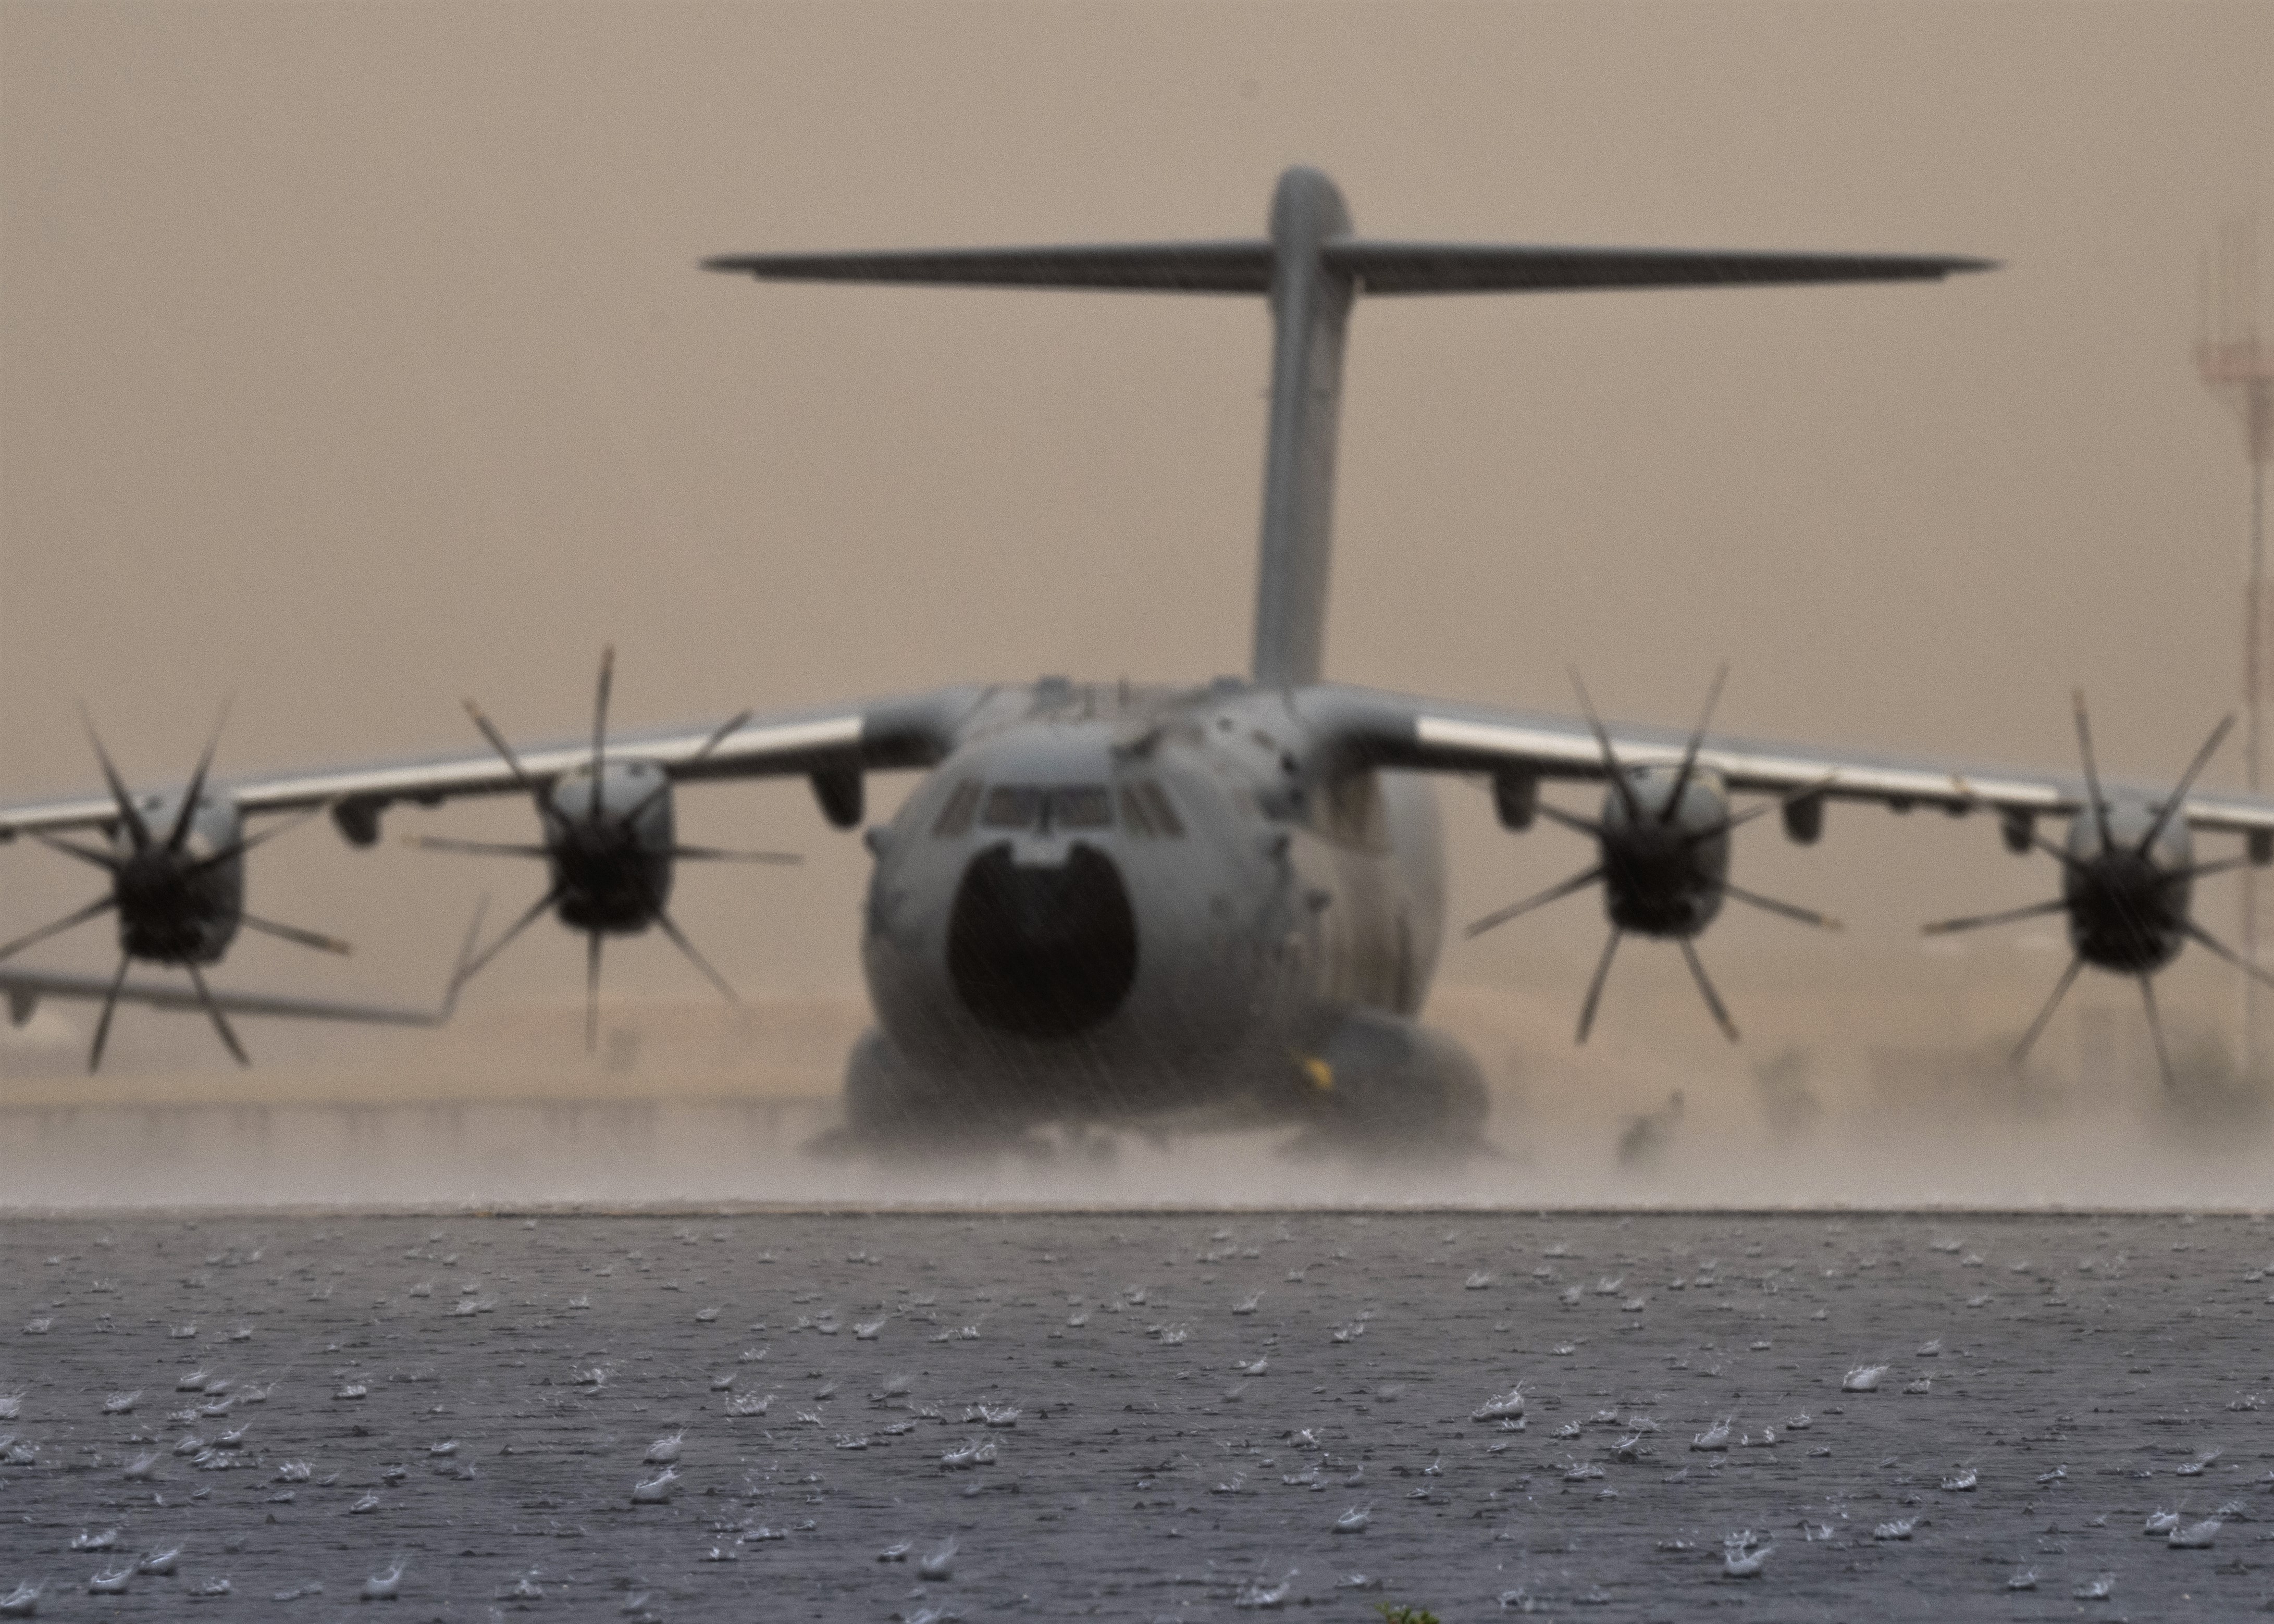 Photo - RAF A400M waiting to depart in a Desert thunderstorm - credit-Alexander Cook , TSgt, USAF